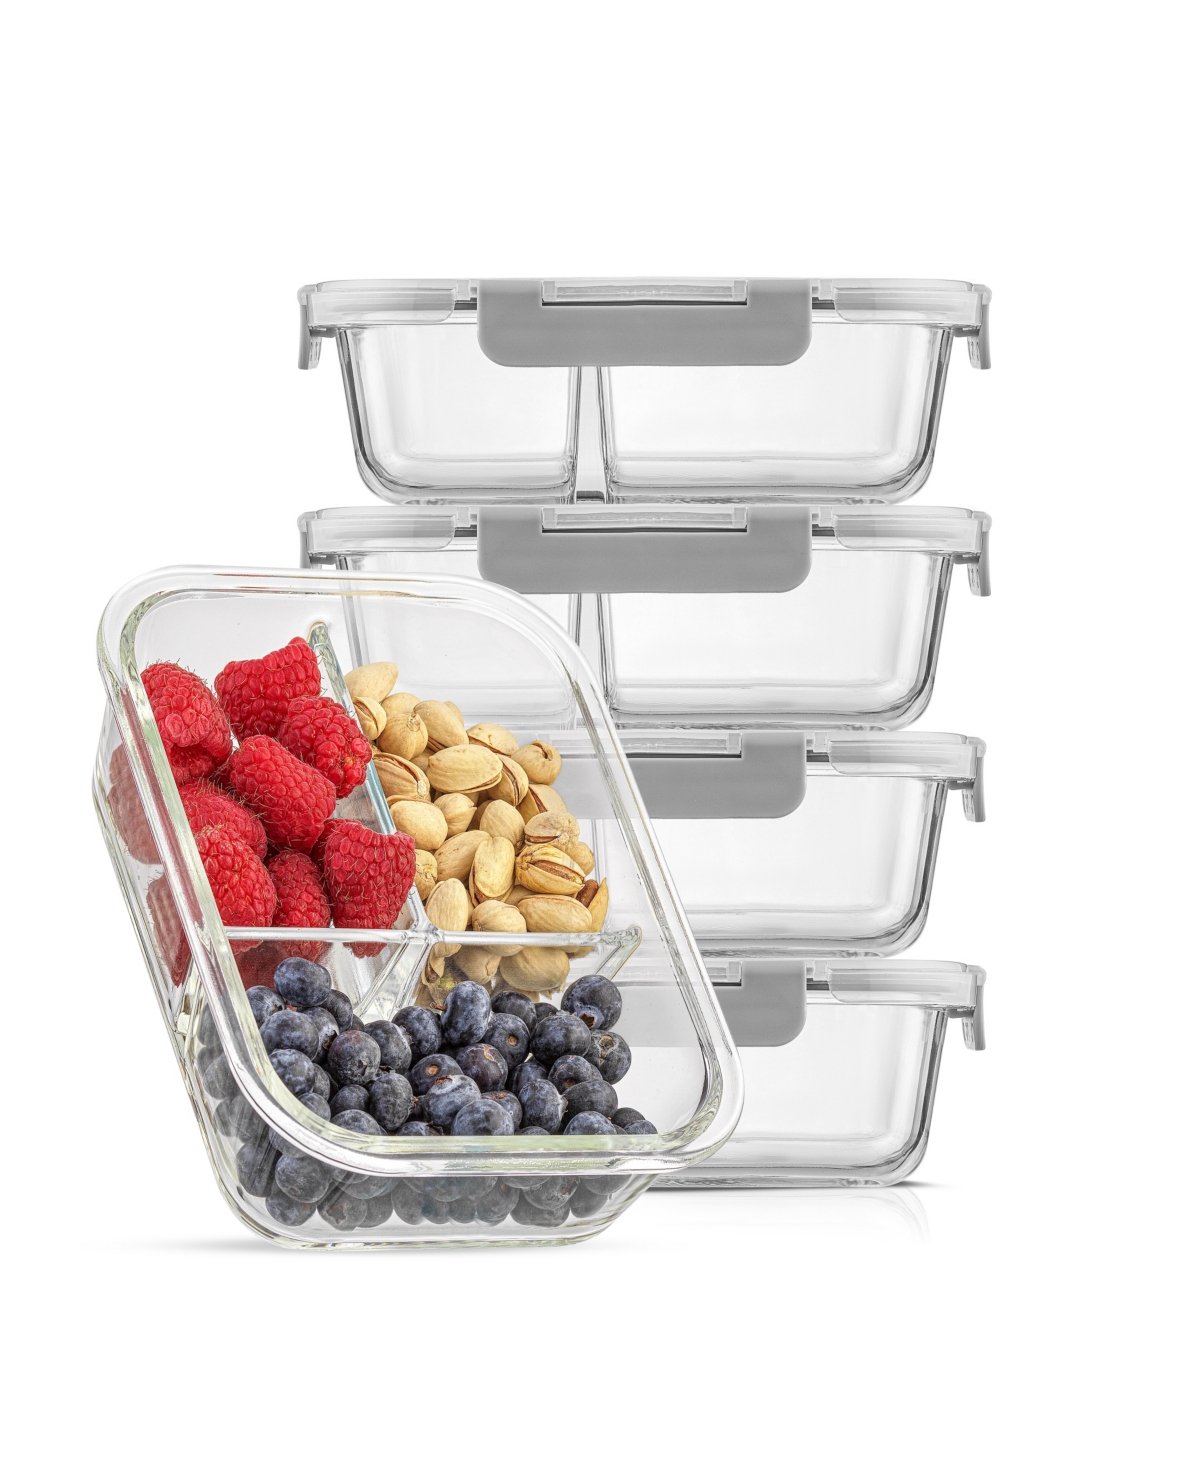 Glass Meal Prep Containers 3-Compartments, Set of 5 - Clear, Gray